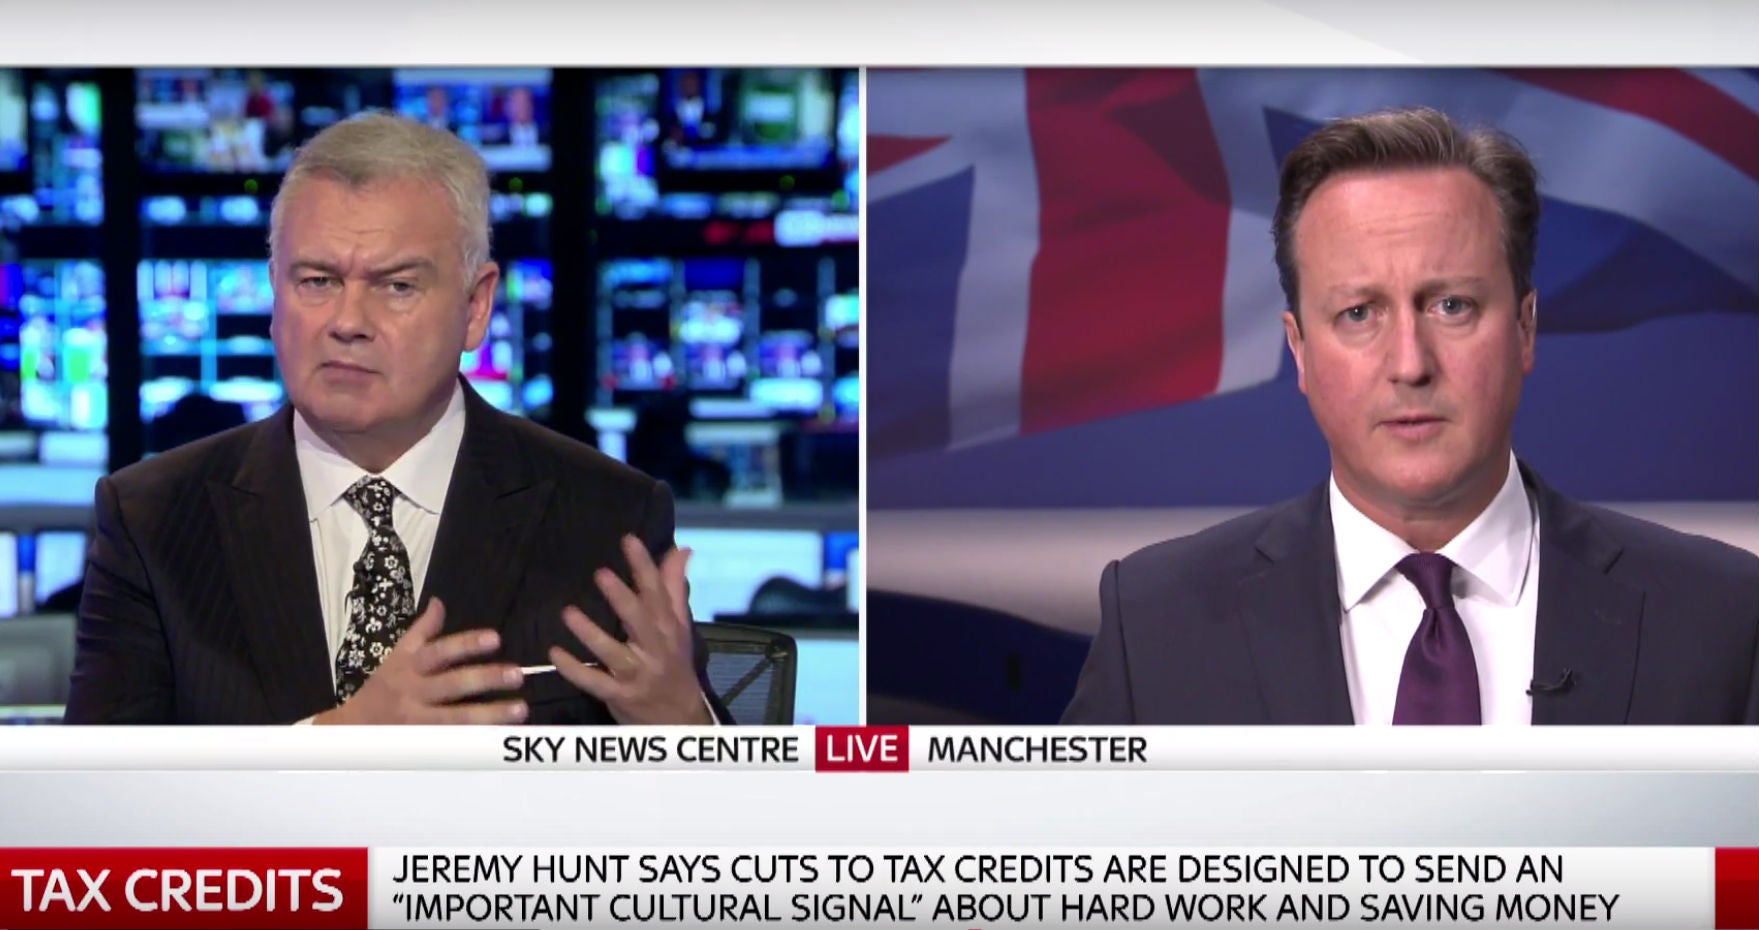 Holmes interviewing Mr Cameron on Sky News